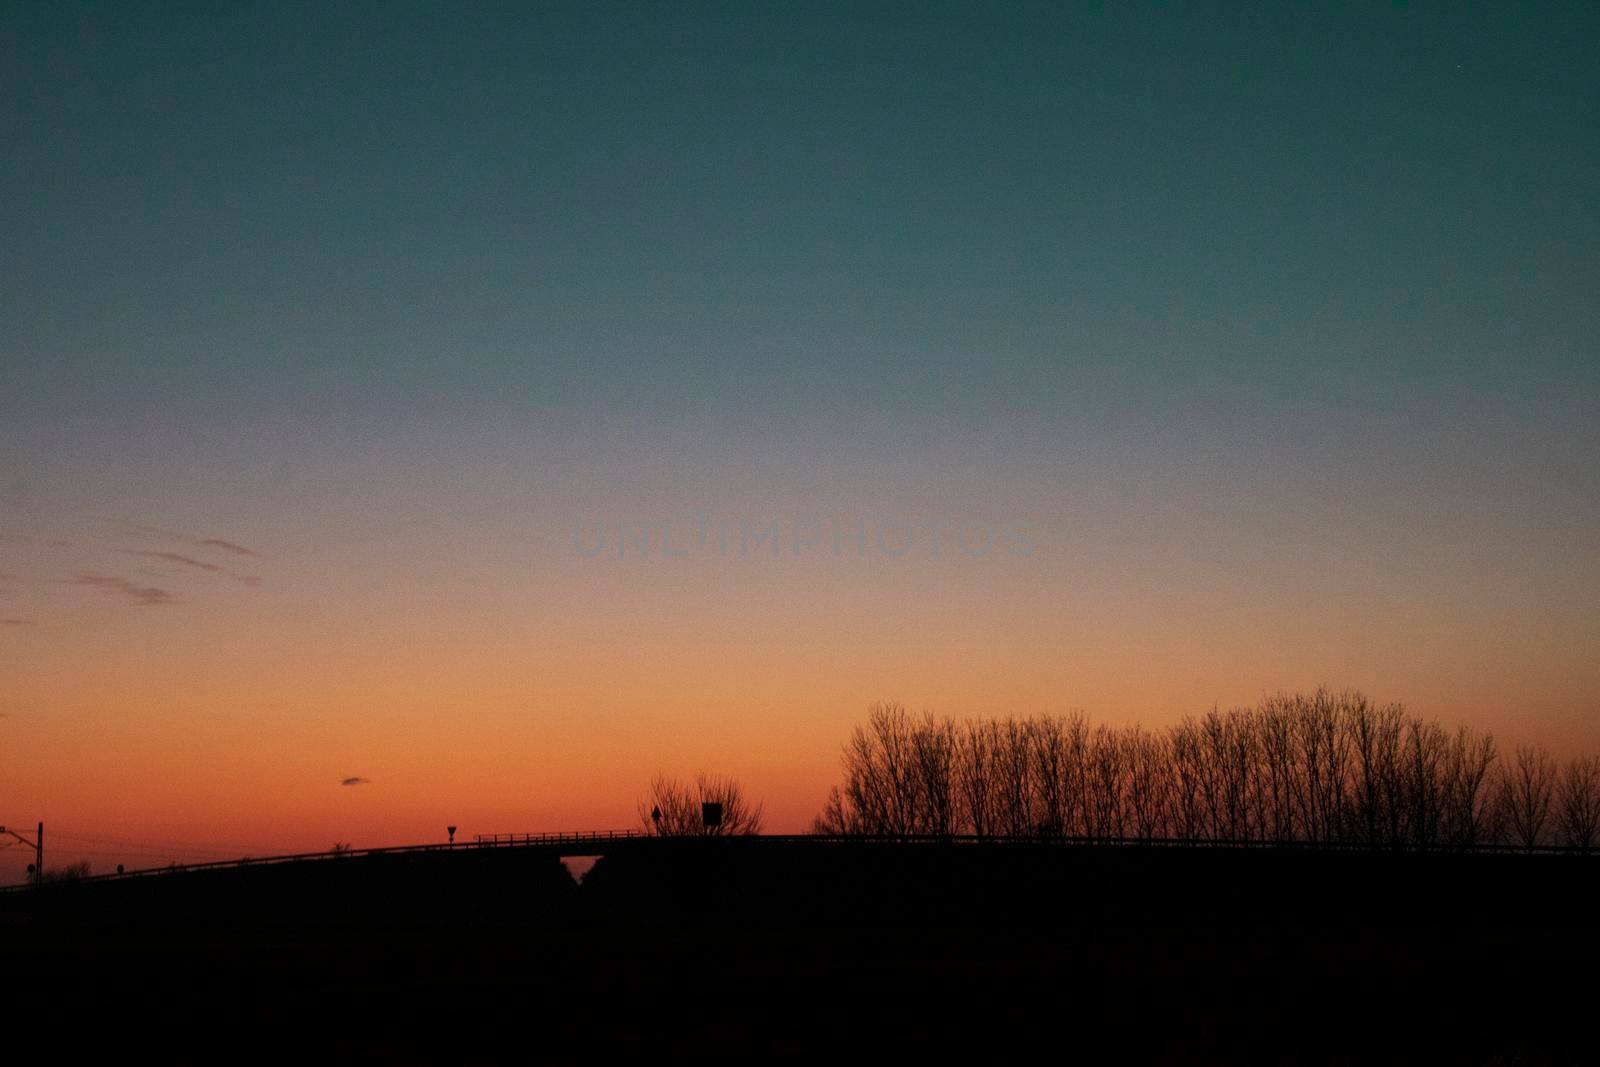 Landscape showing the silhouette of a line of trees with a color gradient in sunset